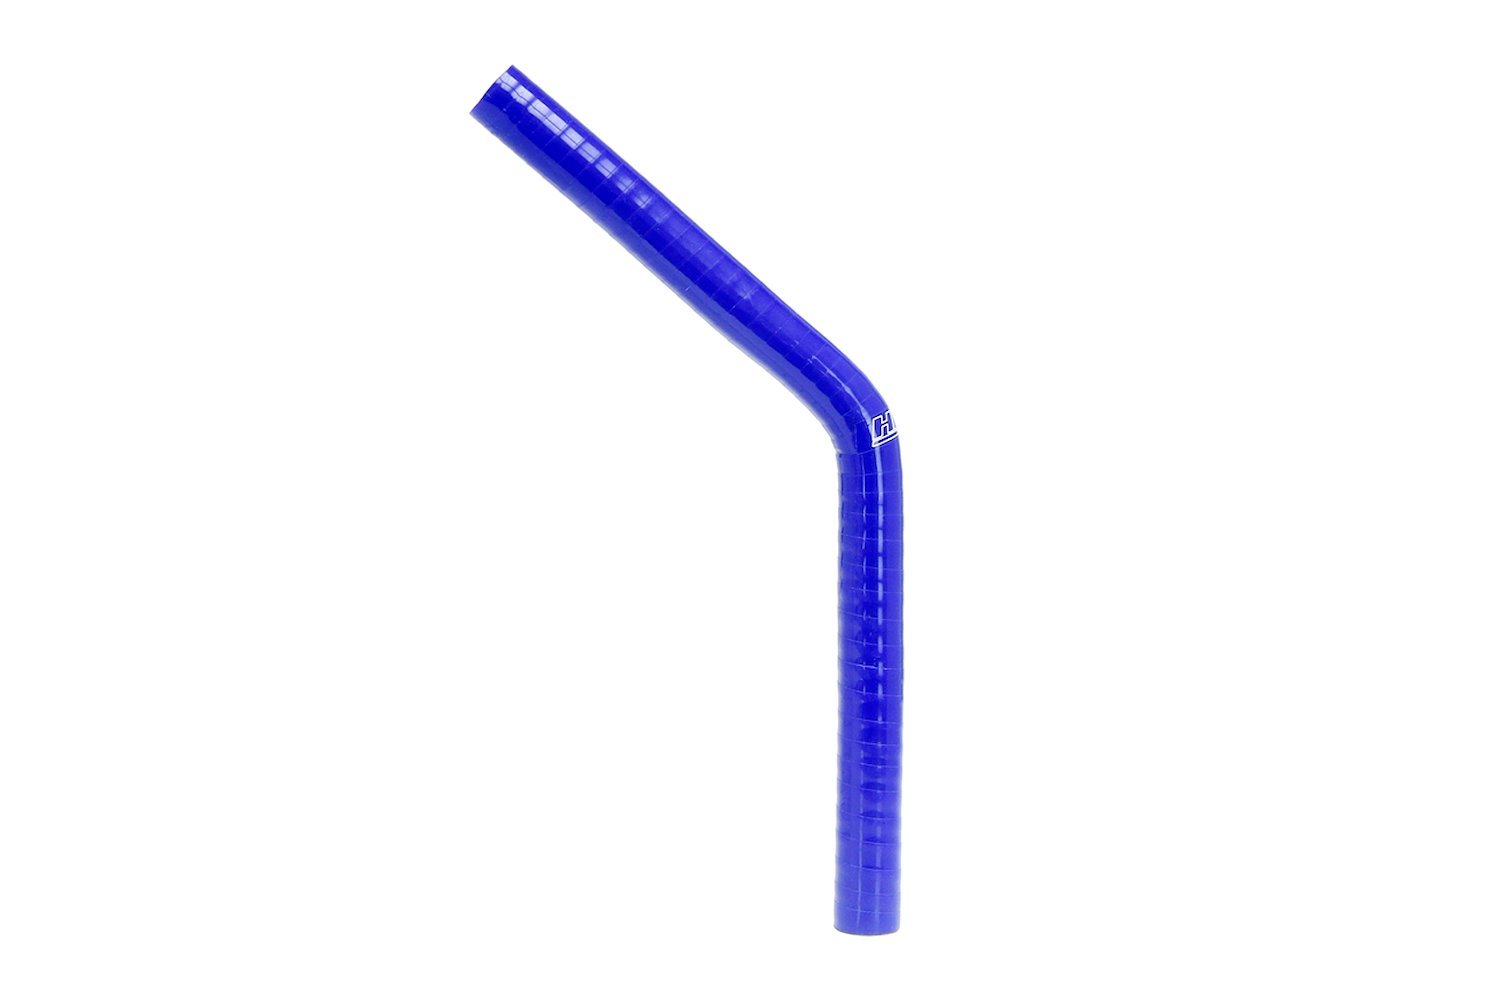 HTSEC45-038-BLUE Silicone 45-Degree Elbow Coupler Hose, High-Temp 4-Ply Reinforced, 3/8 in. ID, Blue